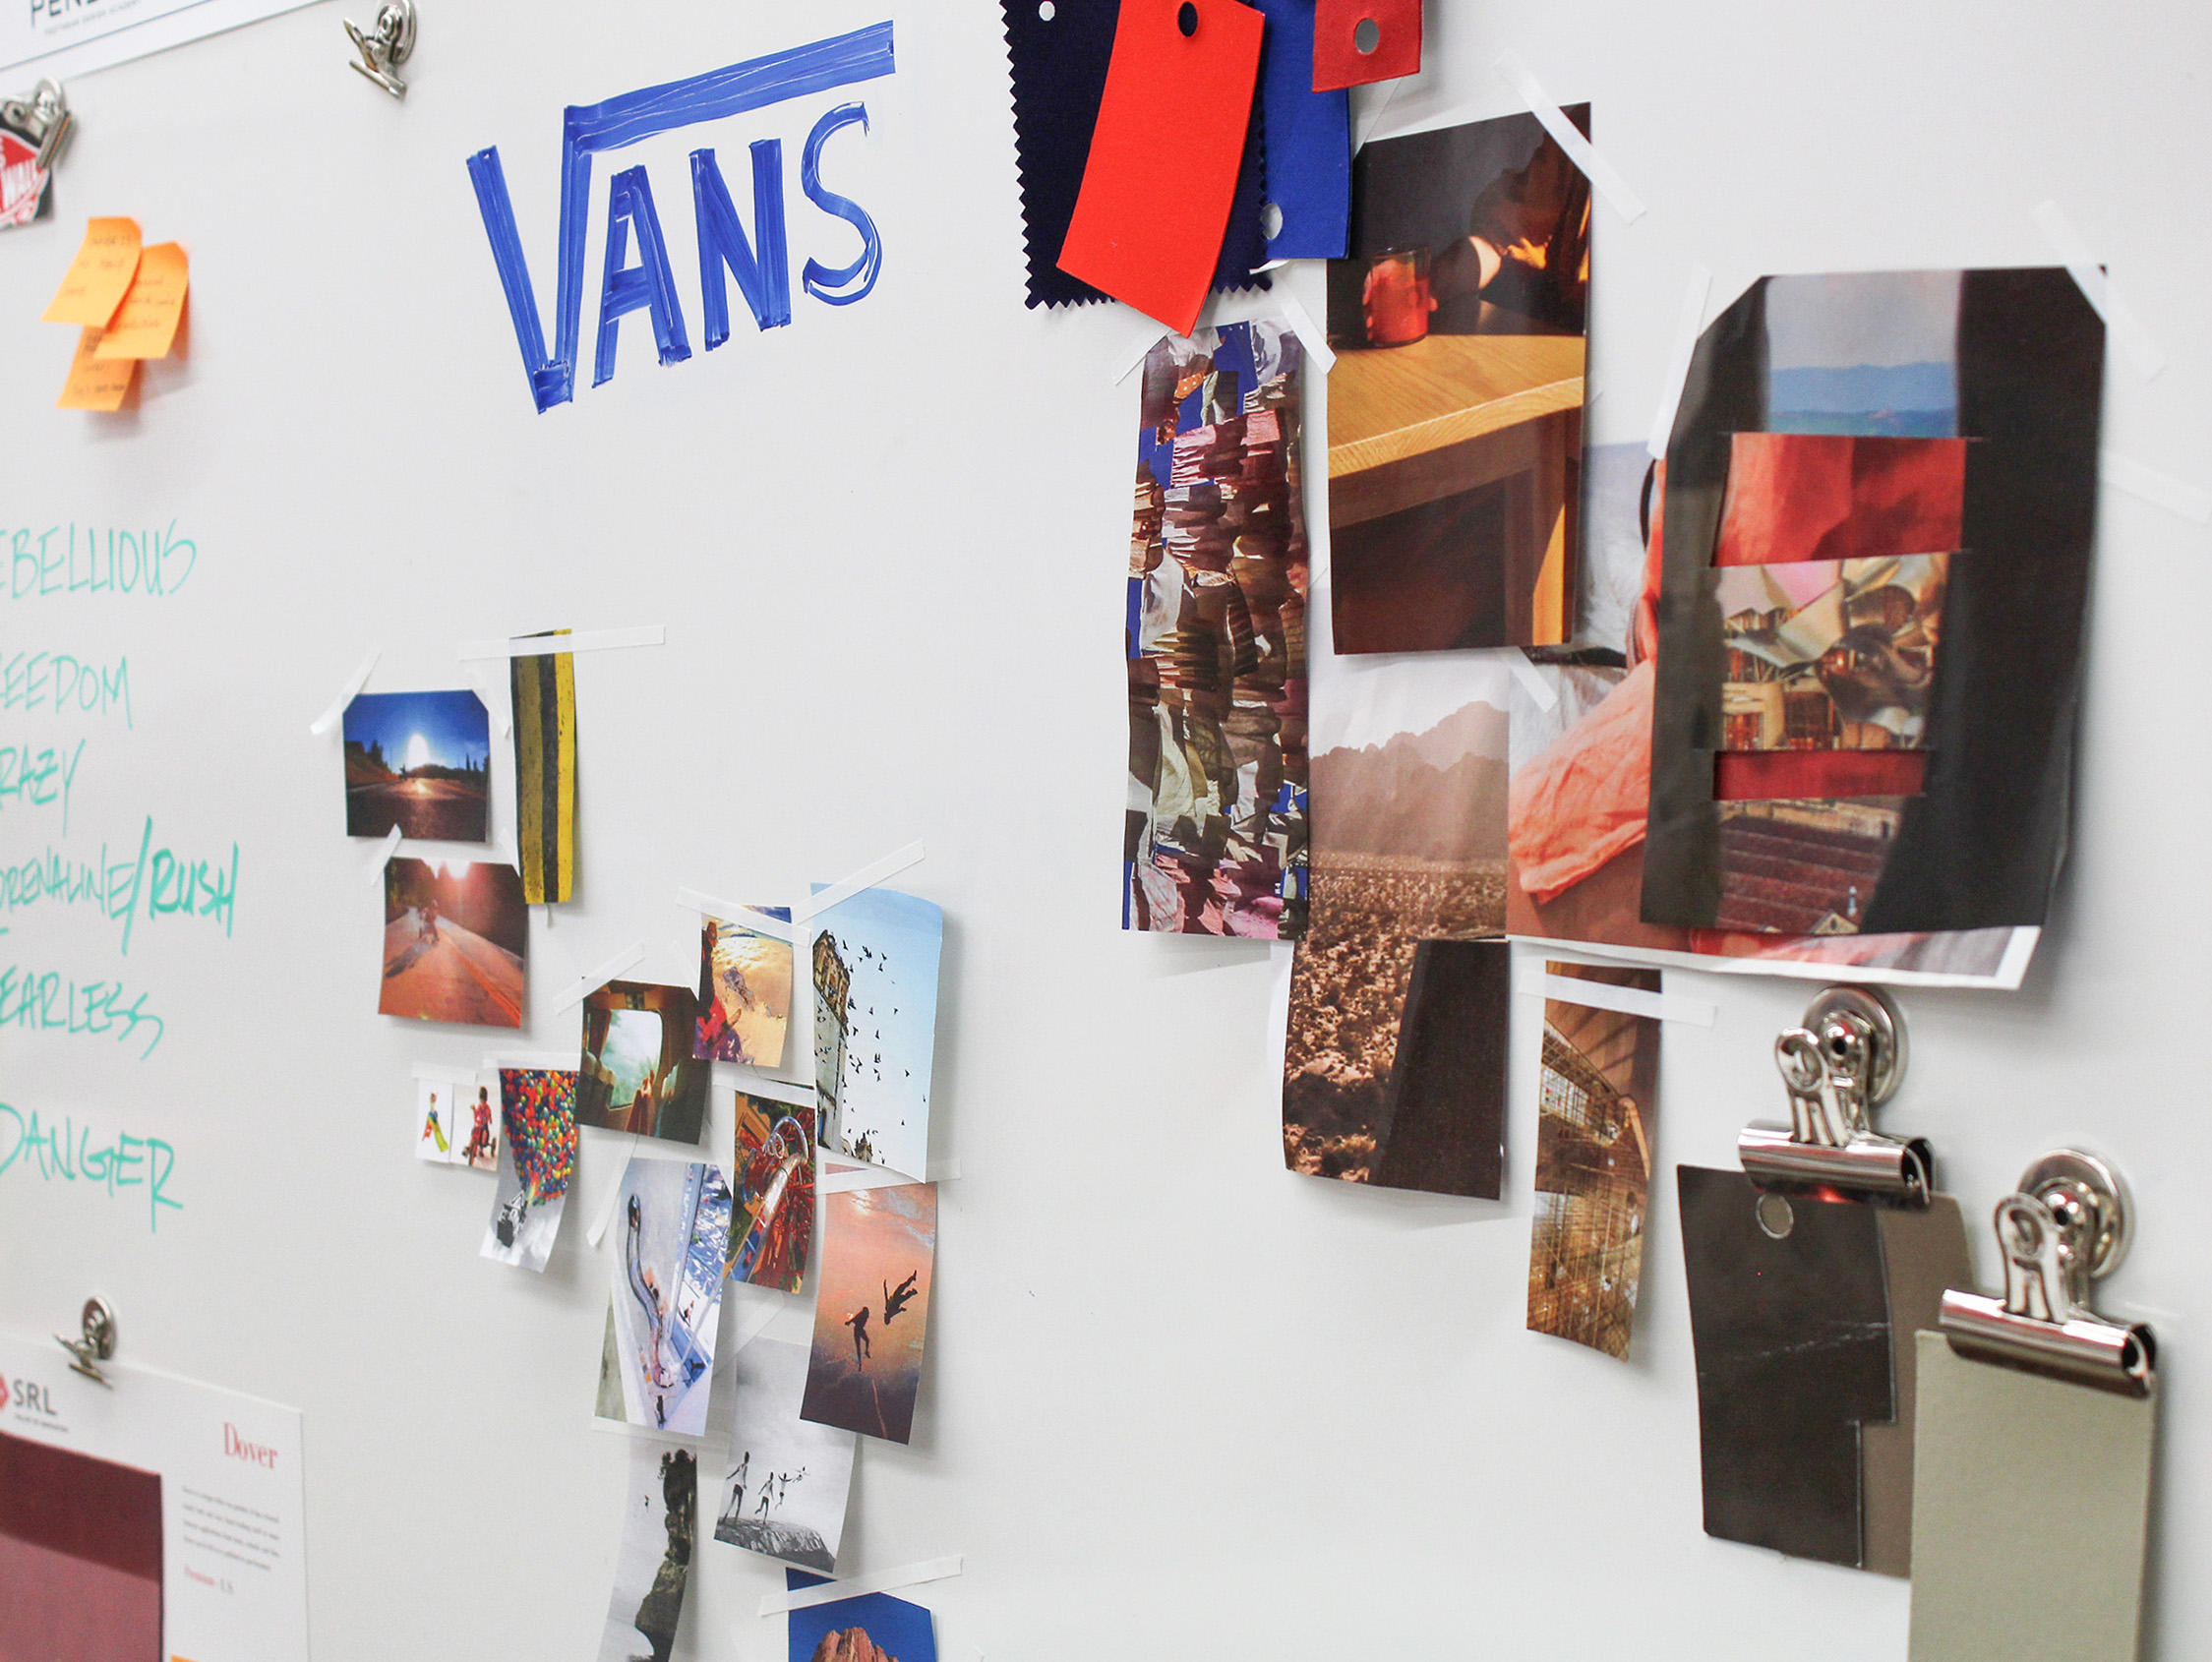 Team Vans place images that showcases their brands identity